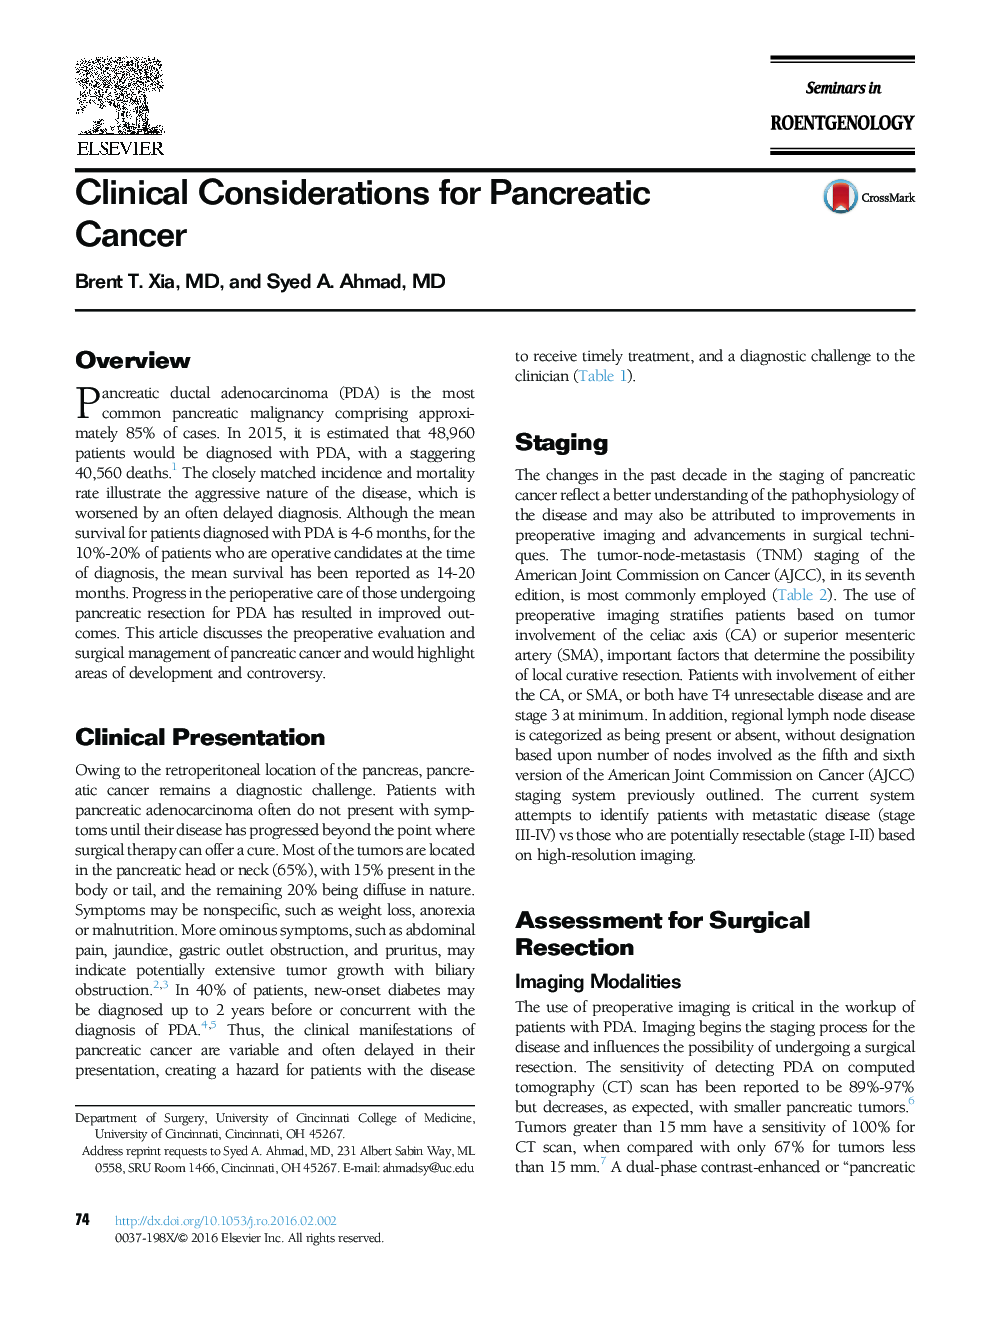 Clinical Considerations for Pancreatic Cancer